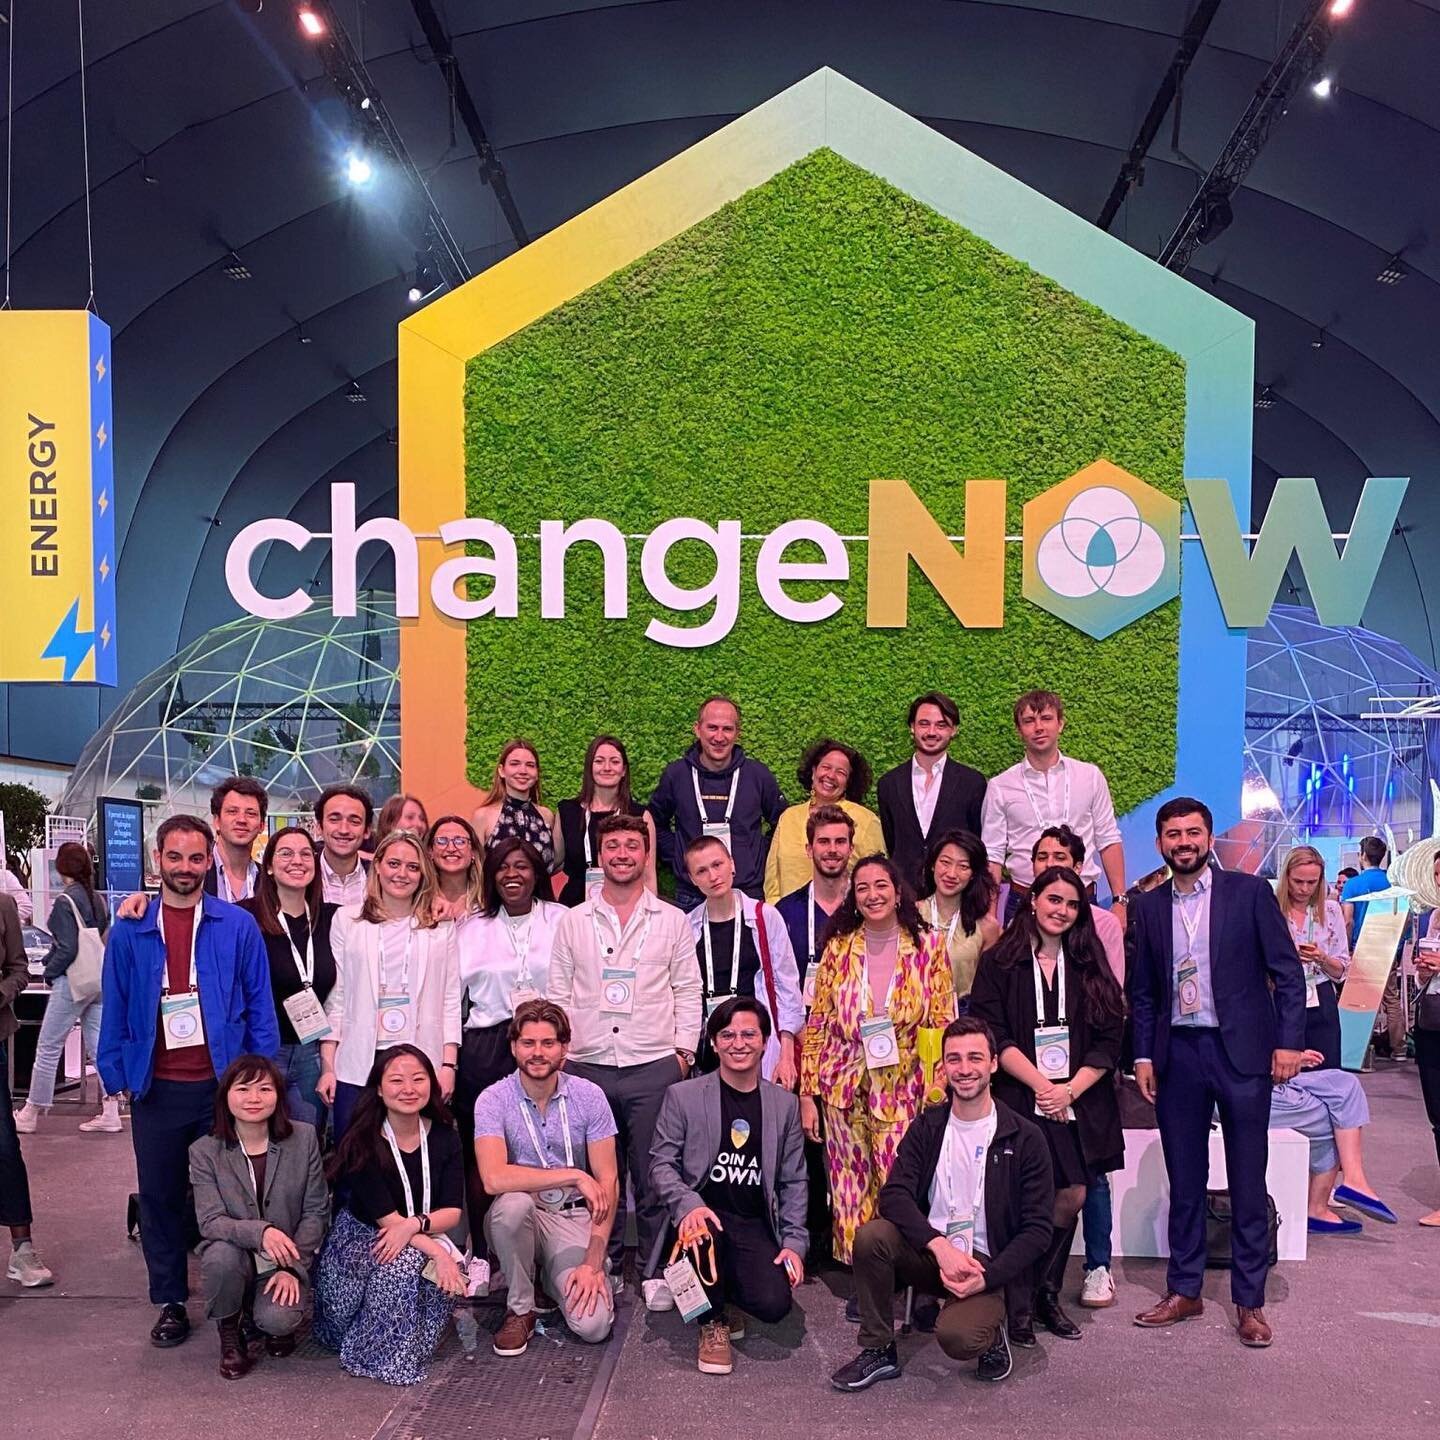 Throwback to a fantastic event where Puffcycle was selected to pitch our initiative to a diverse and global audience at @changenow_world - the largest event of solutions for our planet gathering participants across 120+ countries! 🌍

Big thanks to @